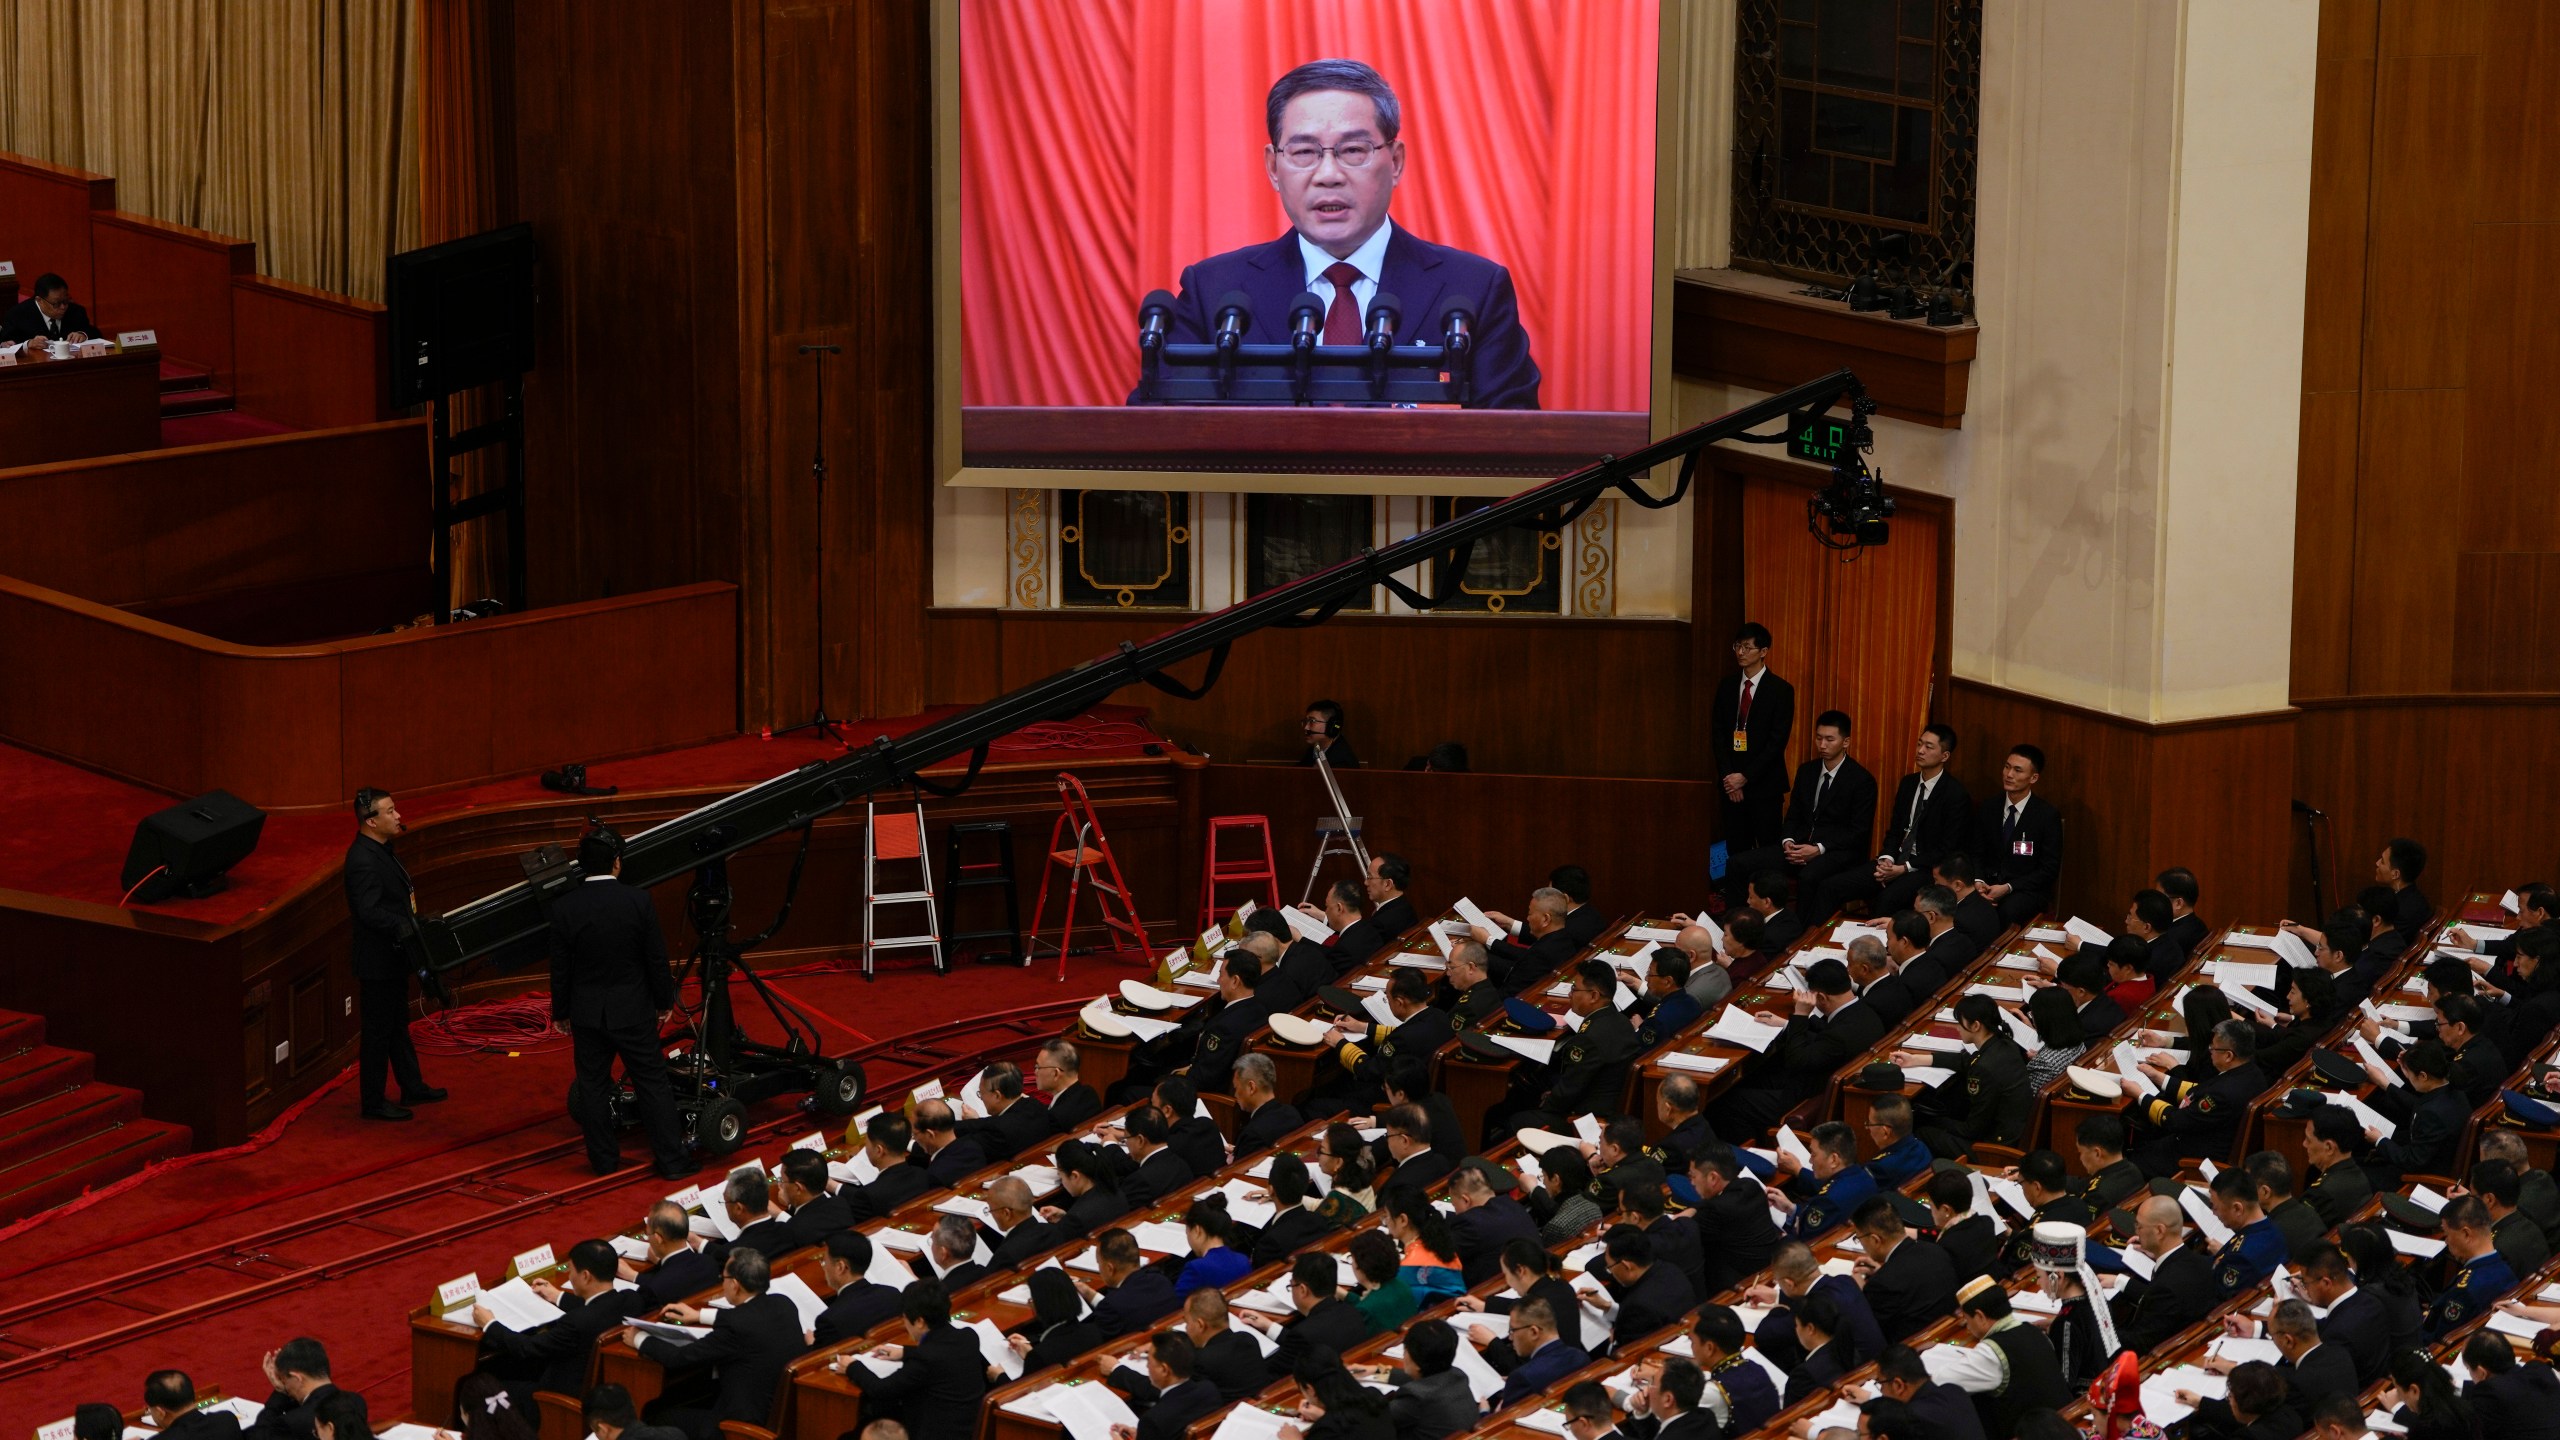 Chinese Premier Li Qiang, on screen, speaks during the opening session of the National People's Congress (NPC) at the Great Hall of the People in Beijing, China, Tuesday, March 5, 2024. (AP Photo/Ng Han Guan)